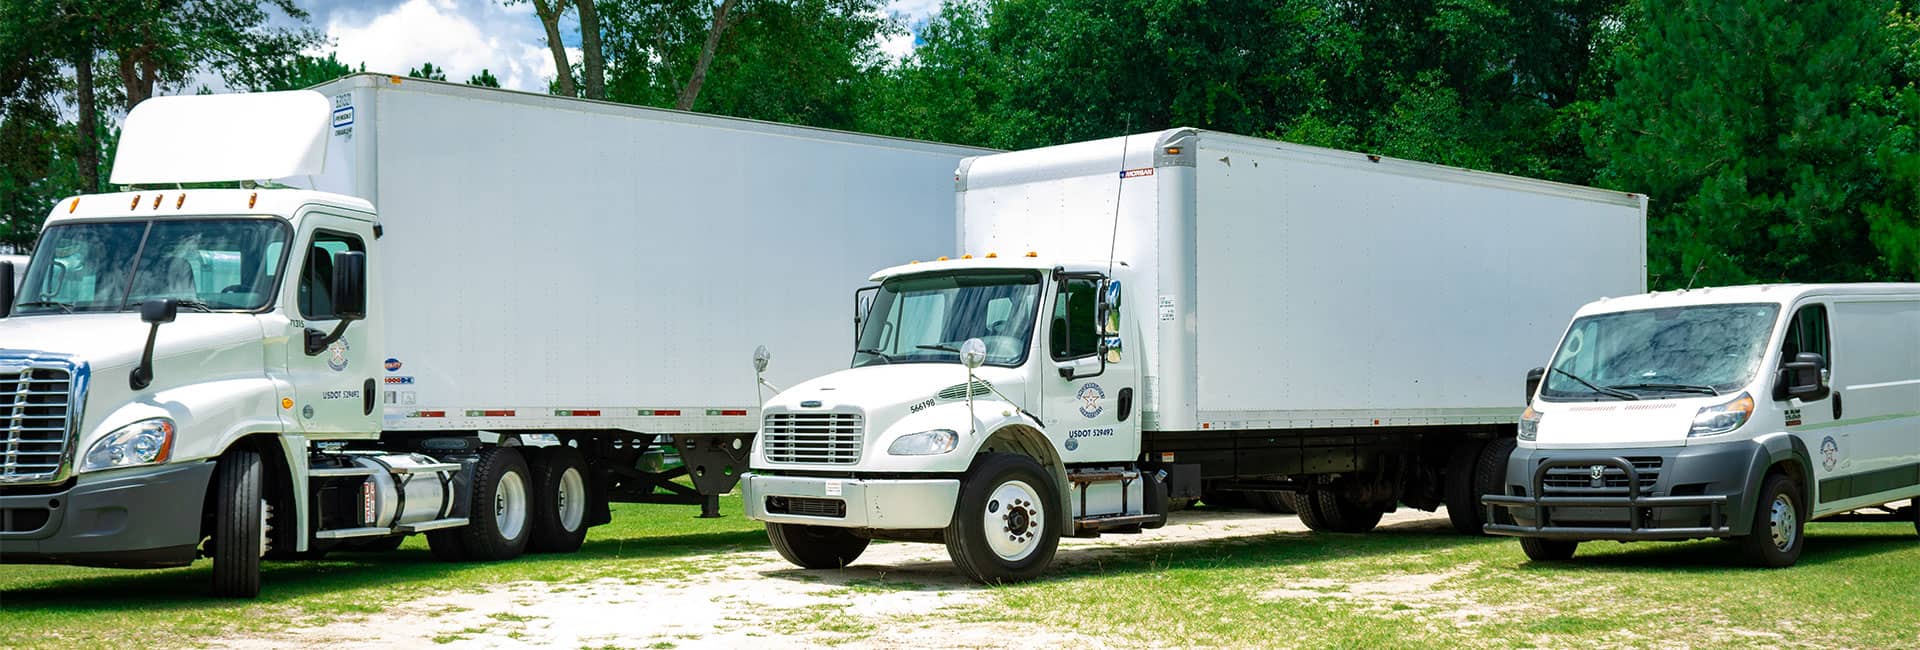 Sylvania Trucking Company, Trucking Services and Freight Forwarding Services